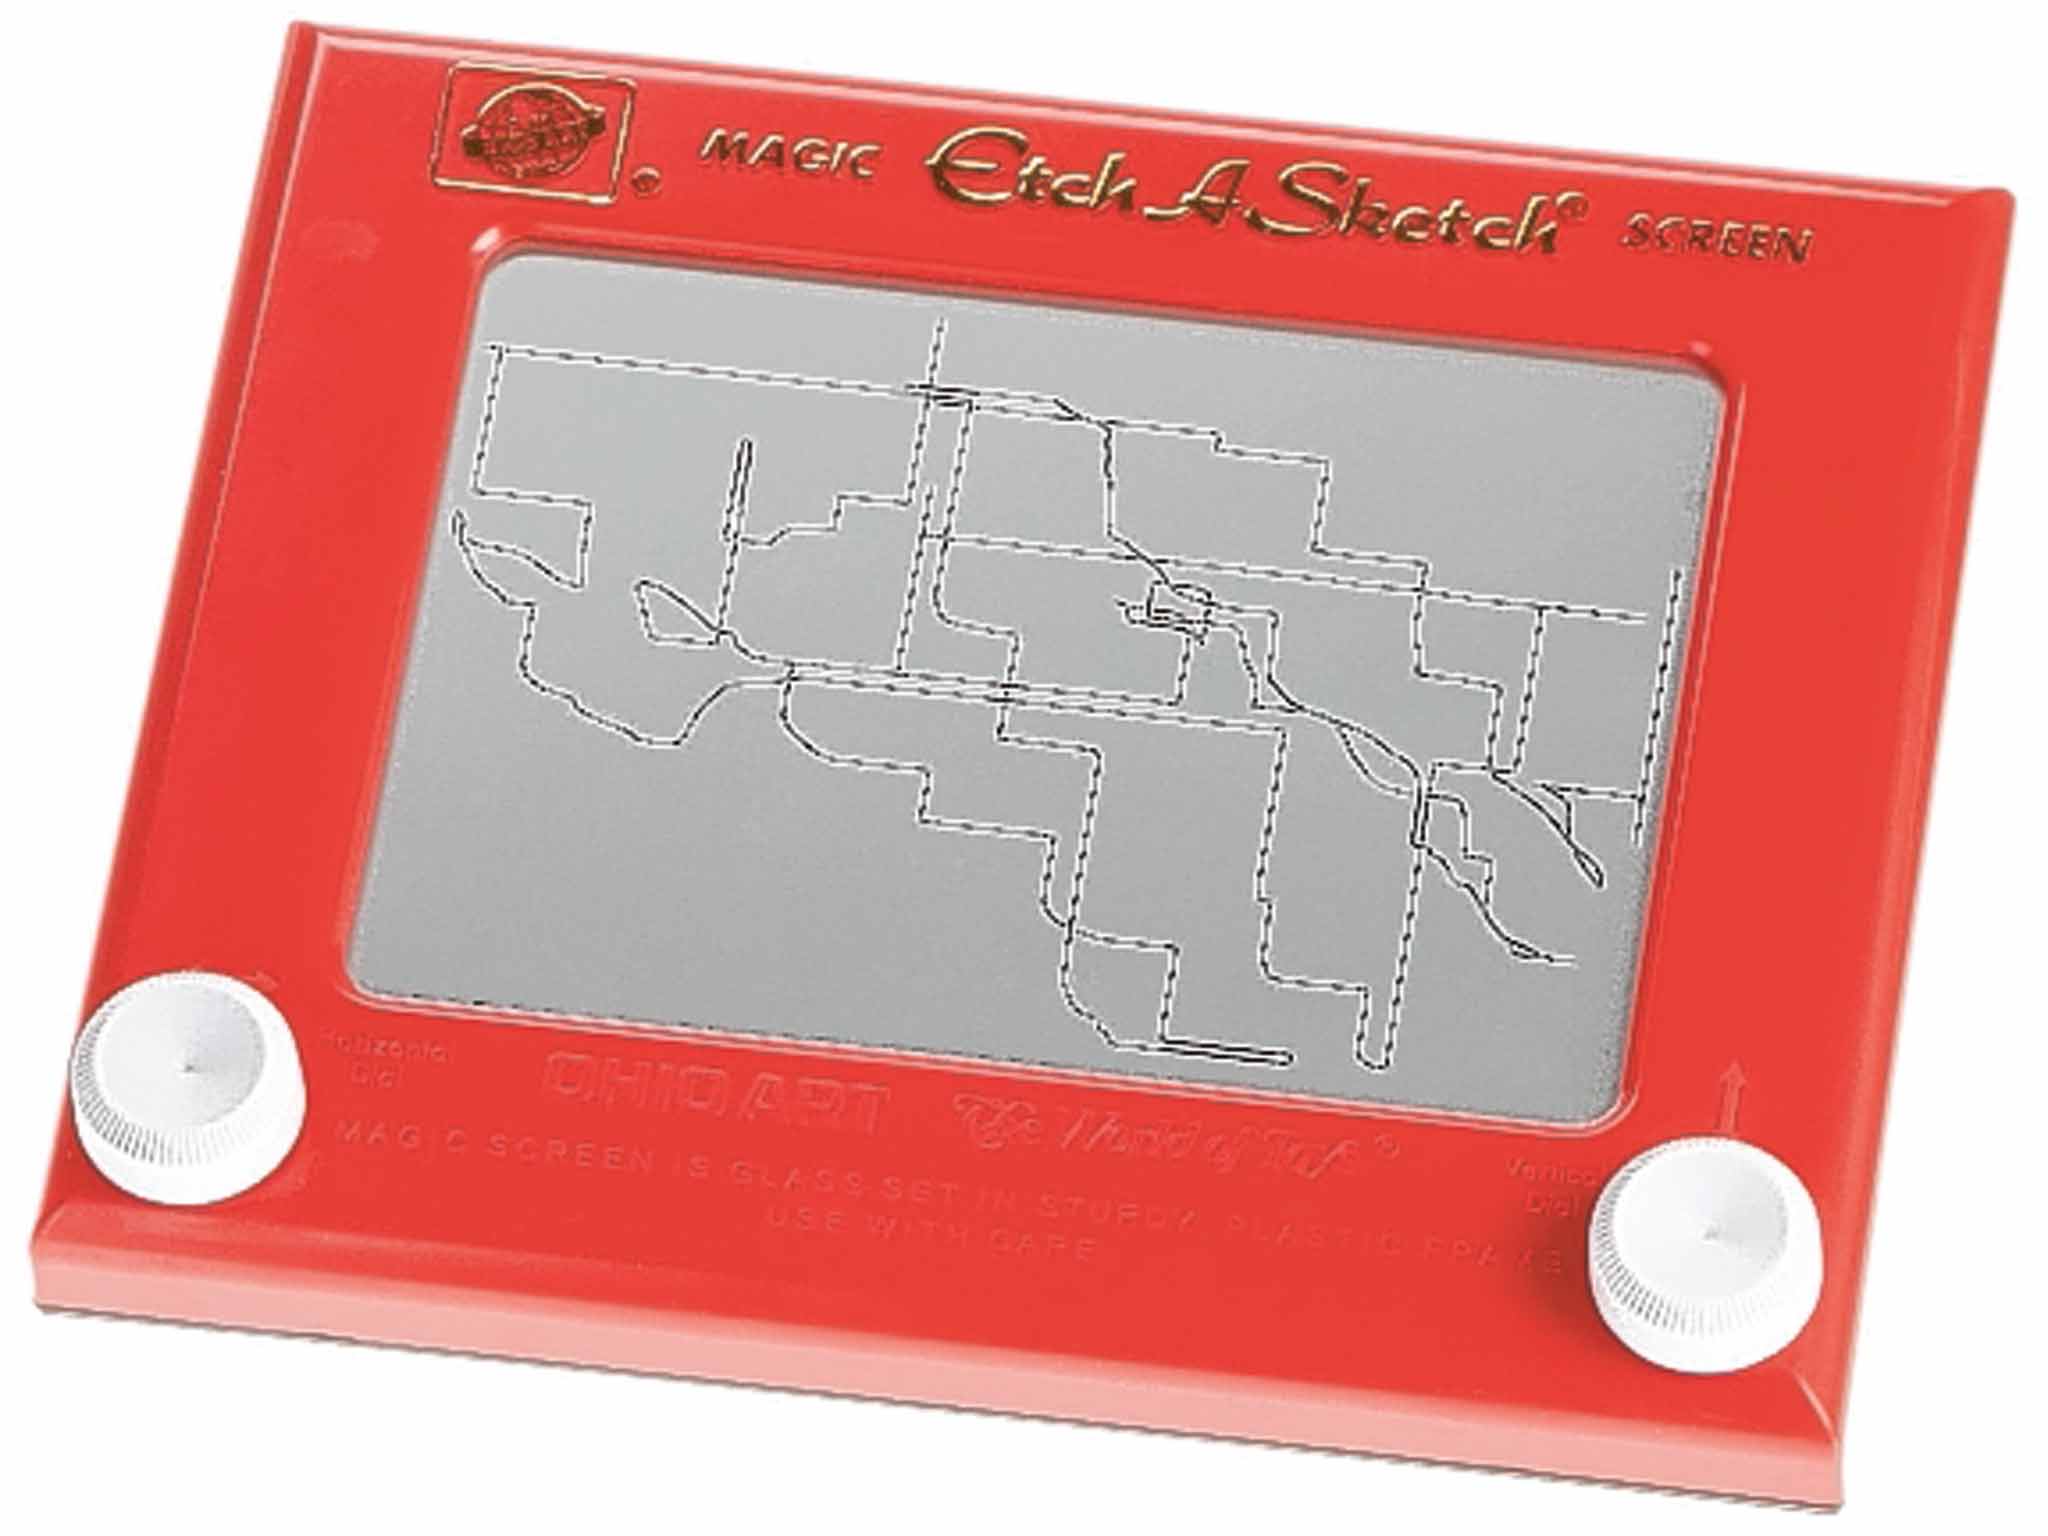 This weekend 55 years ago, the very first Etch A Sketch rolled off a factory production line in Bryan, Ohio